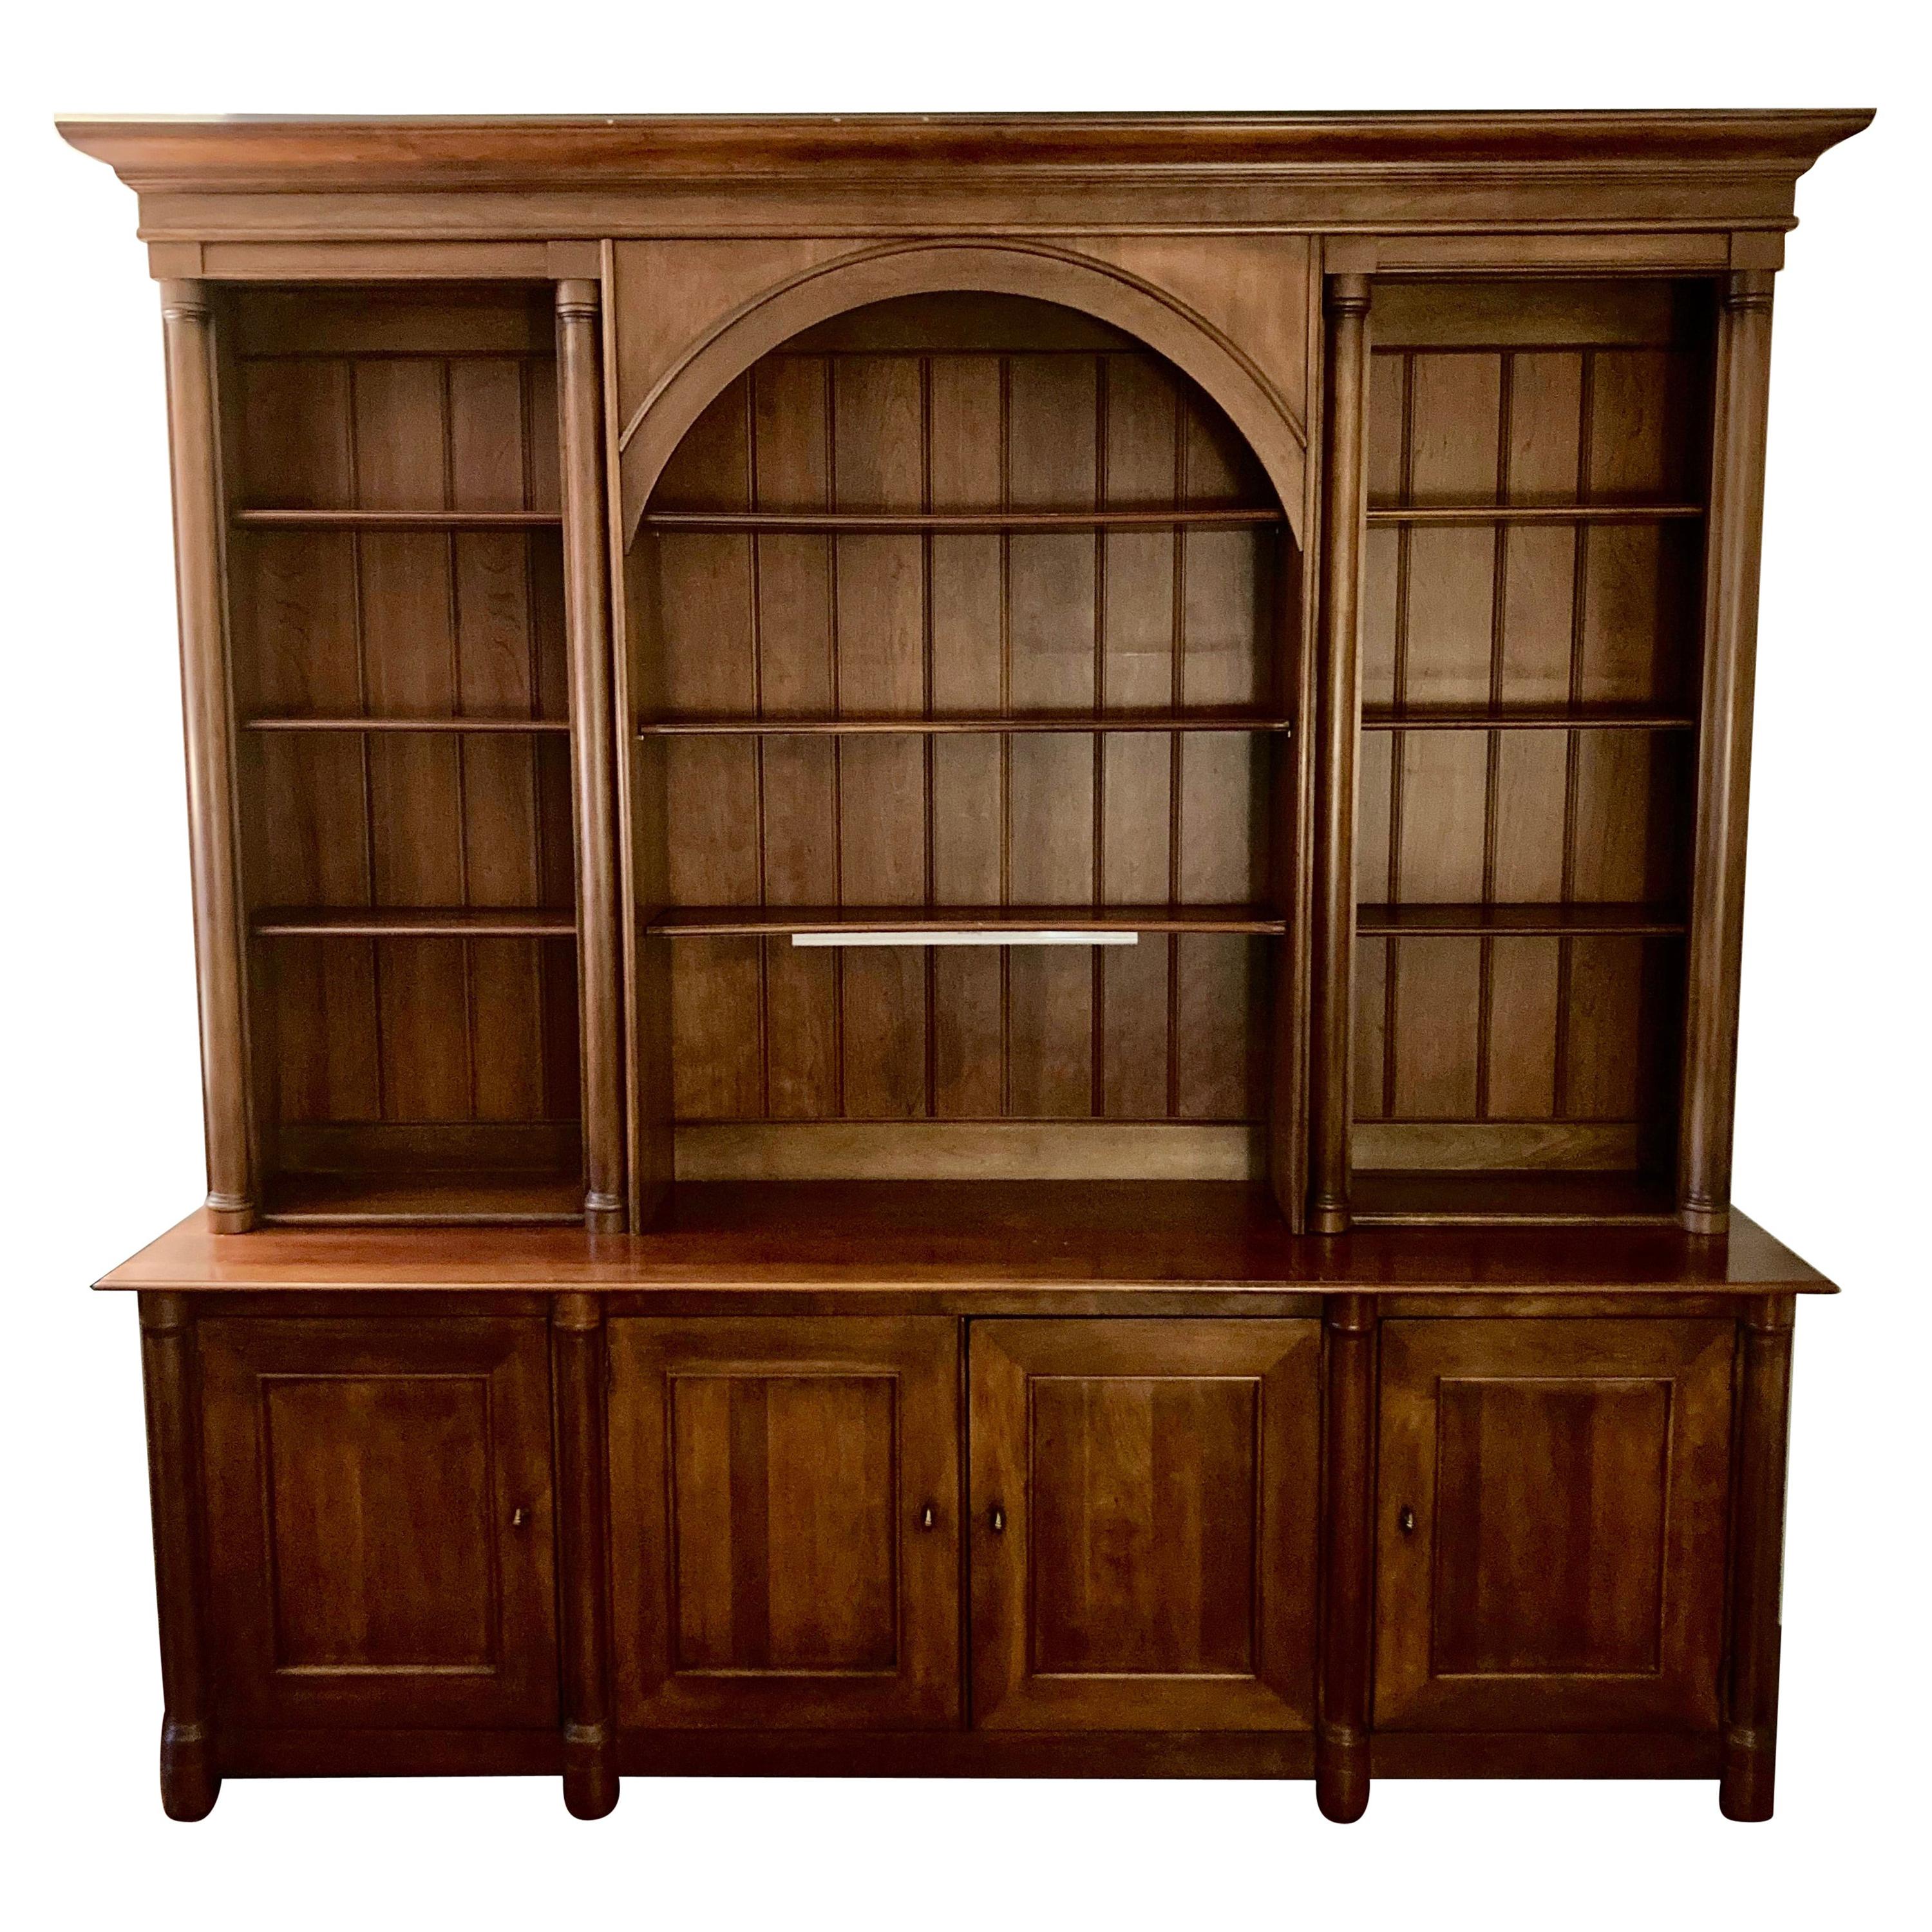 Very Grand Cherry Triple Bookcase Breakfront Cabinet